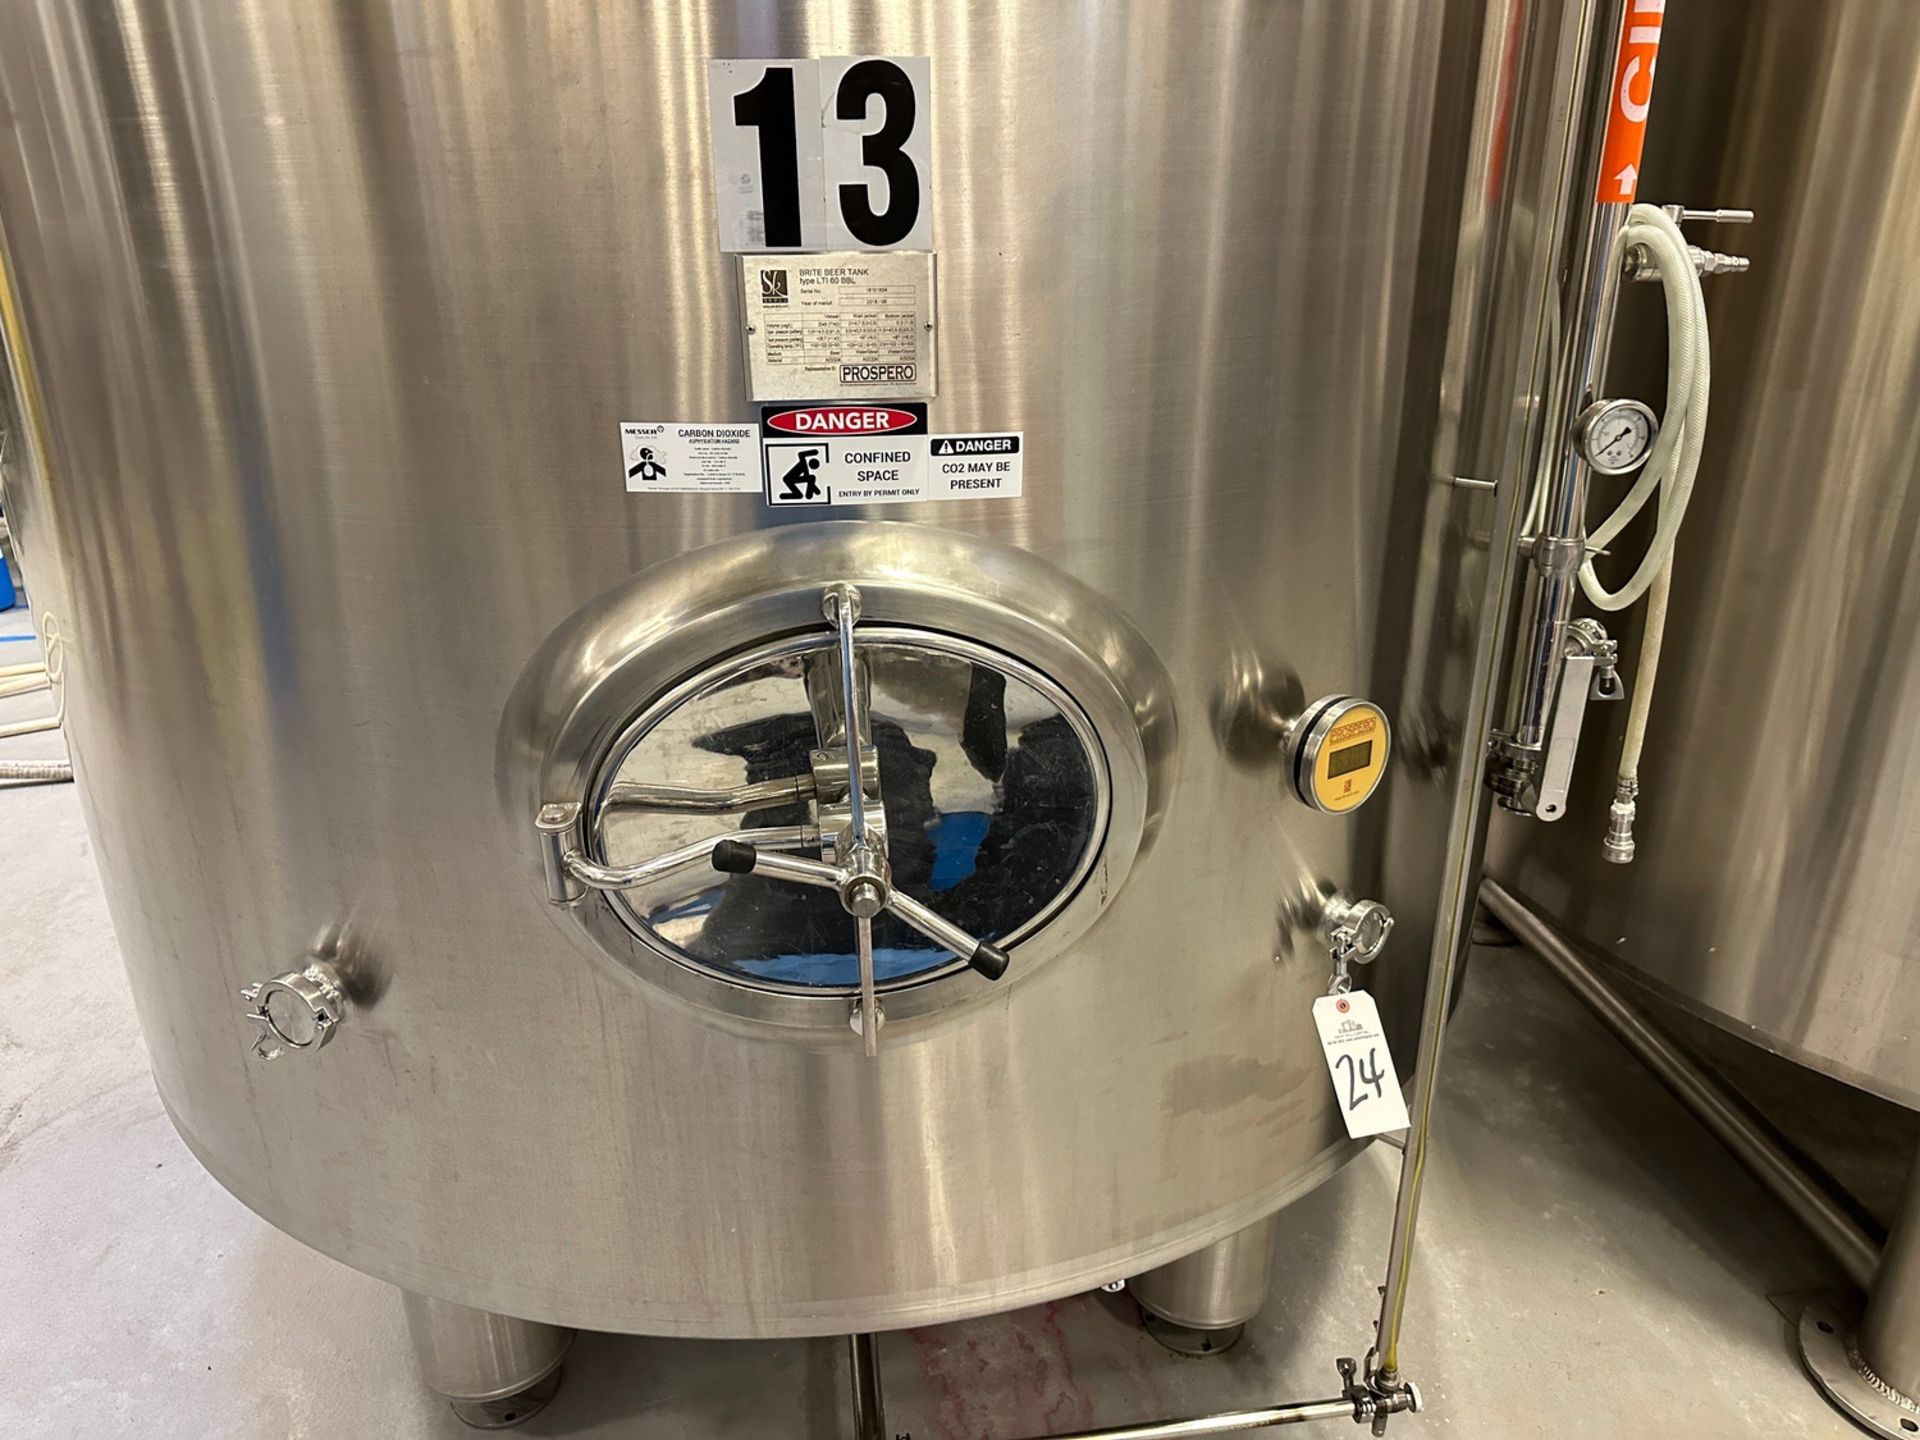 2018 Prospero 60 BBL Stainless Steel Brite Tank (13) - Dish Bottom, Glycol Jacketed | Rig Fee $2230 - Image 2 of 5